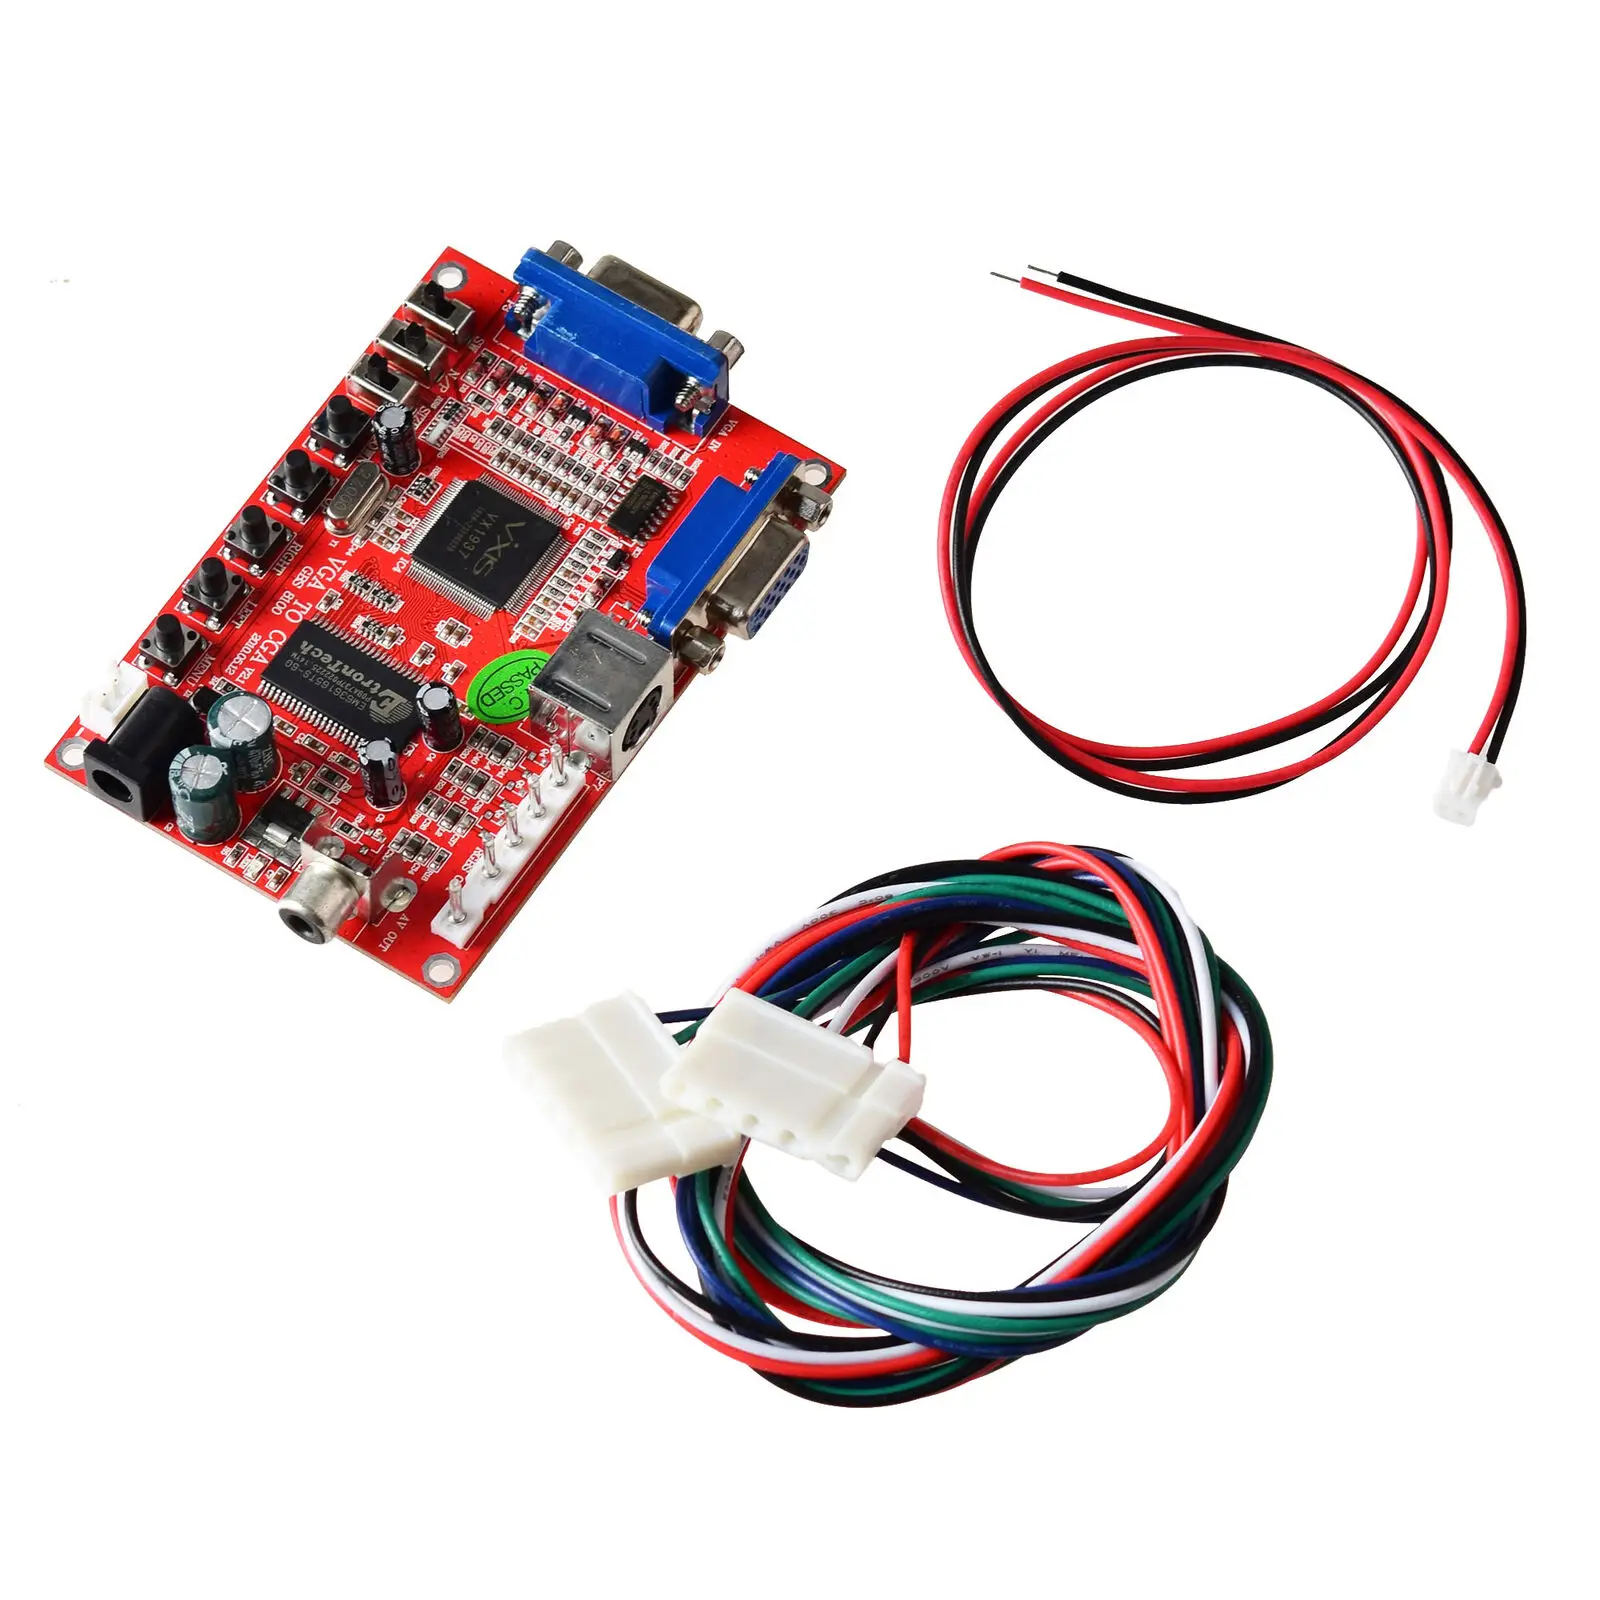 

Arcade Game VGA to CGA RGBS/CVBS/S-VIDEO Video Output Converter Board GBS-8100 With Power Supply Wire Supports NTSC & PAL